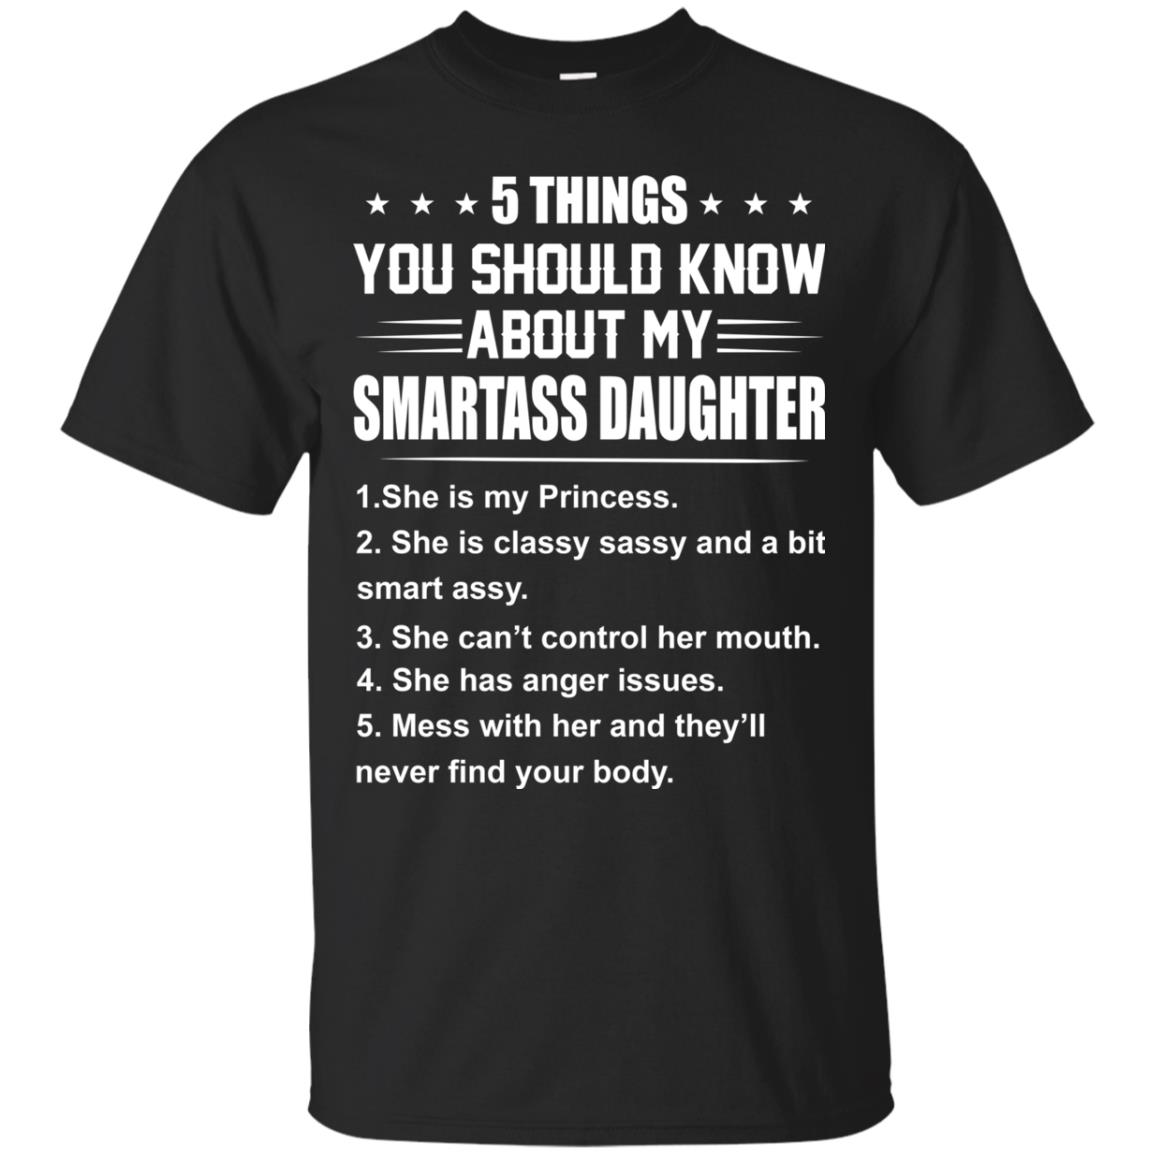 5 Things You Should Know About My Smartass Daughter T Shirts